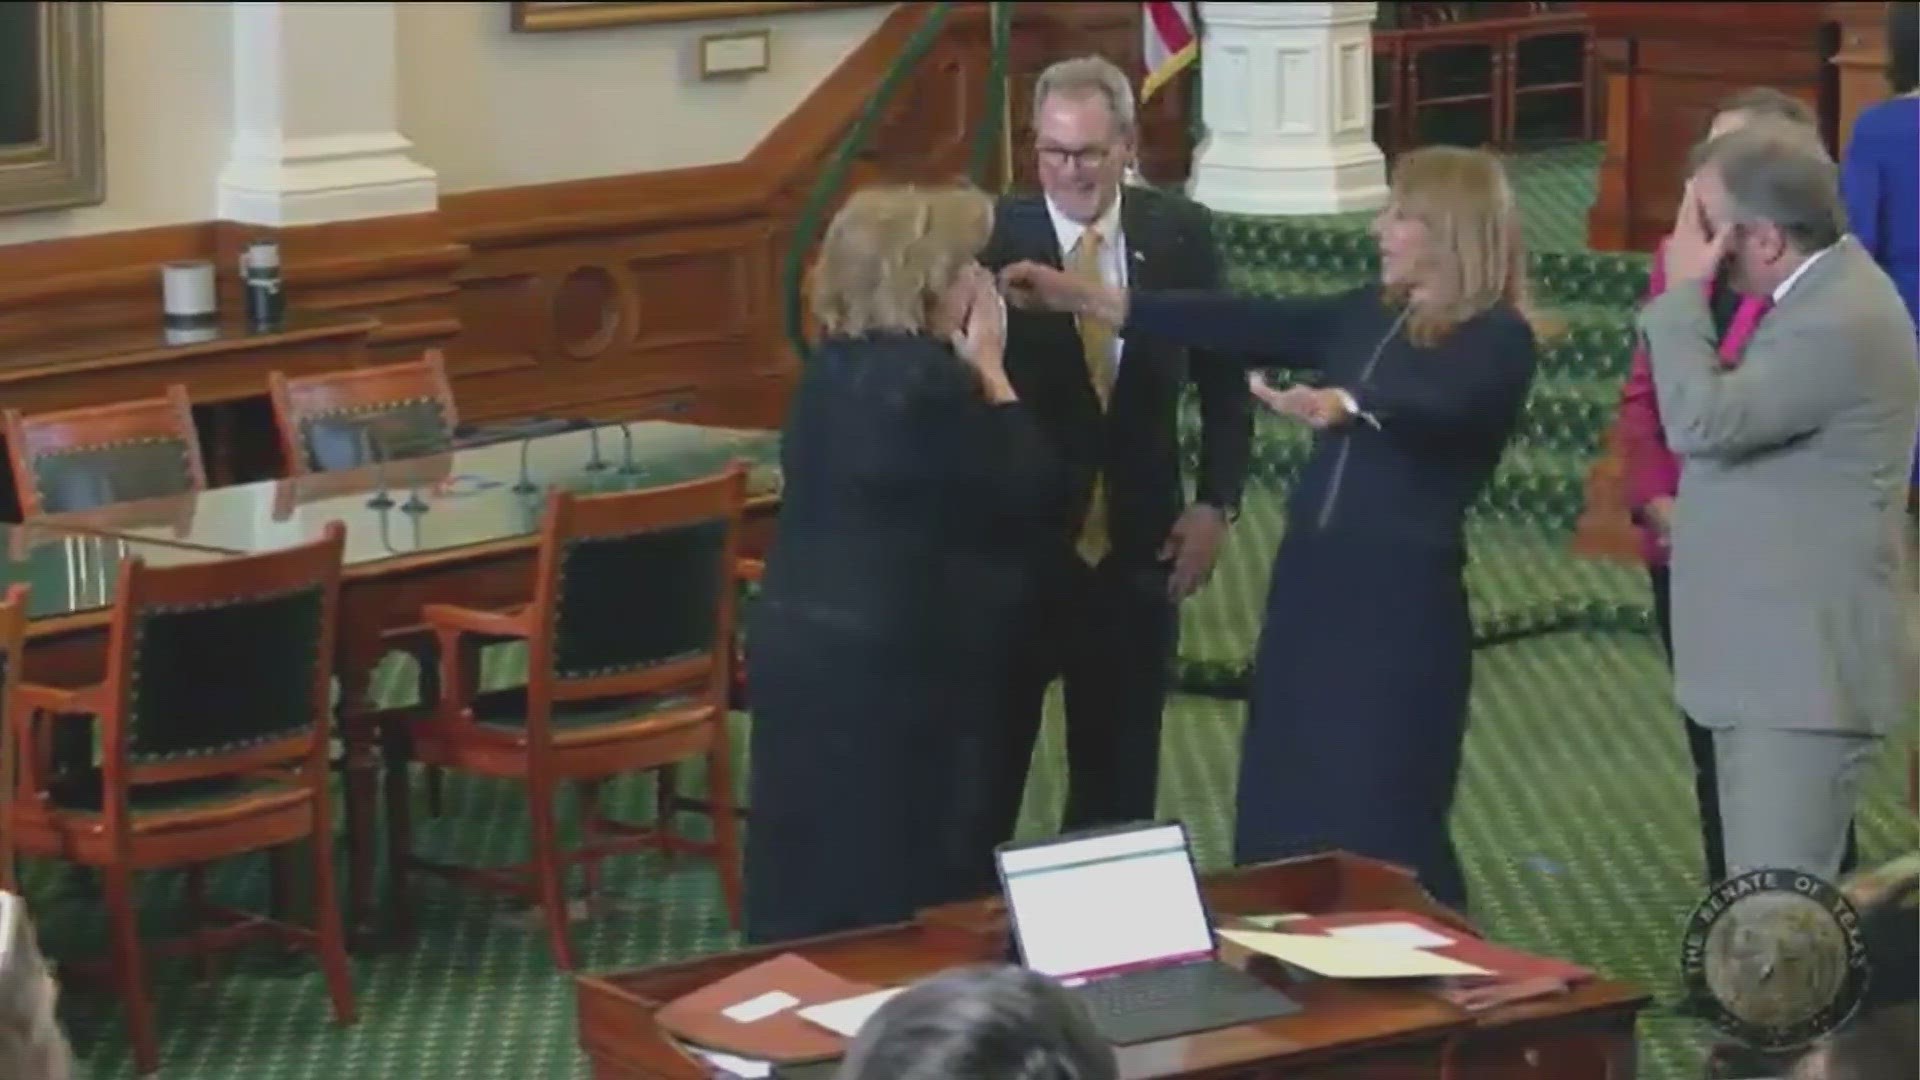 The Texas Senate voted to approve former State Sen. Jane Nelson as secretary of state.